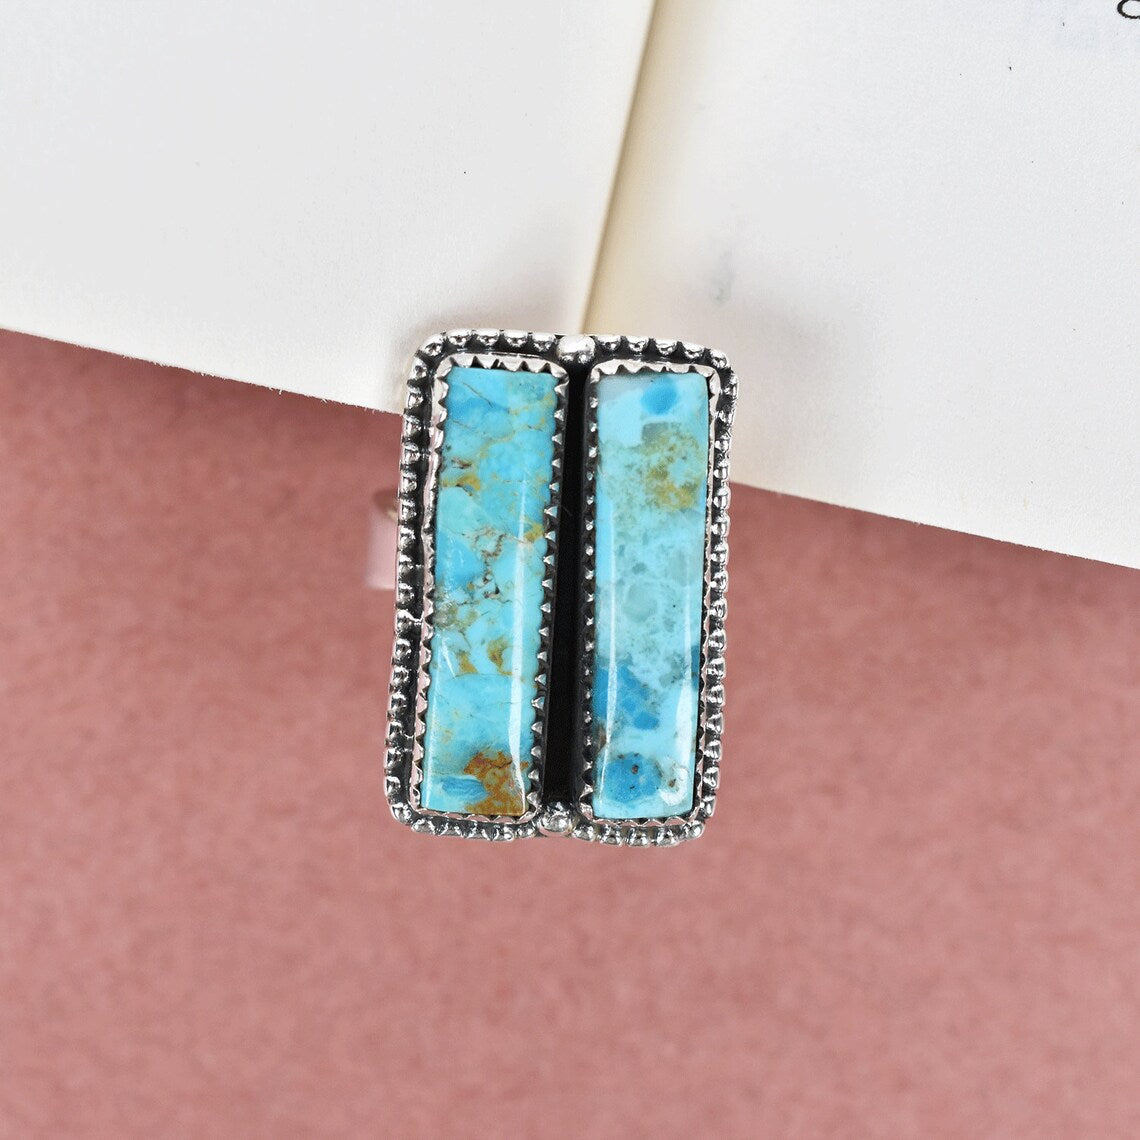 Vintage Two Stone Rectangle Turquoise Southwestern Style Ring - 925 Sterling Silver Rings